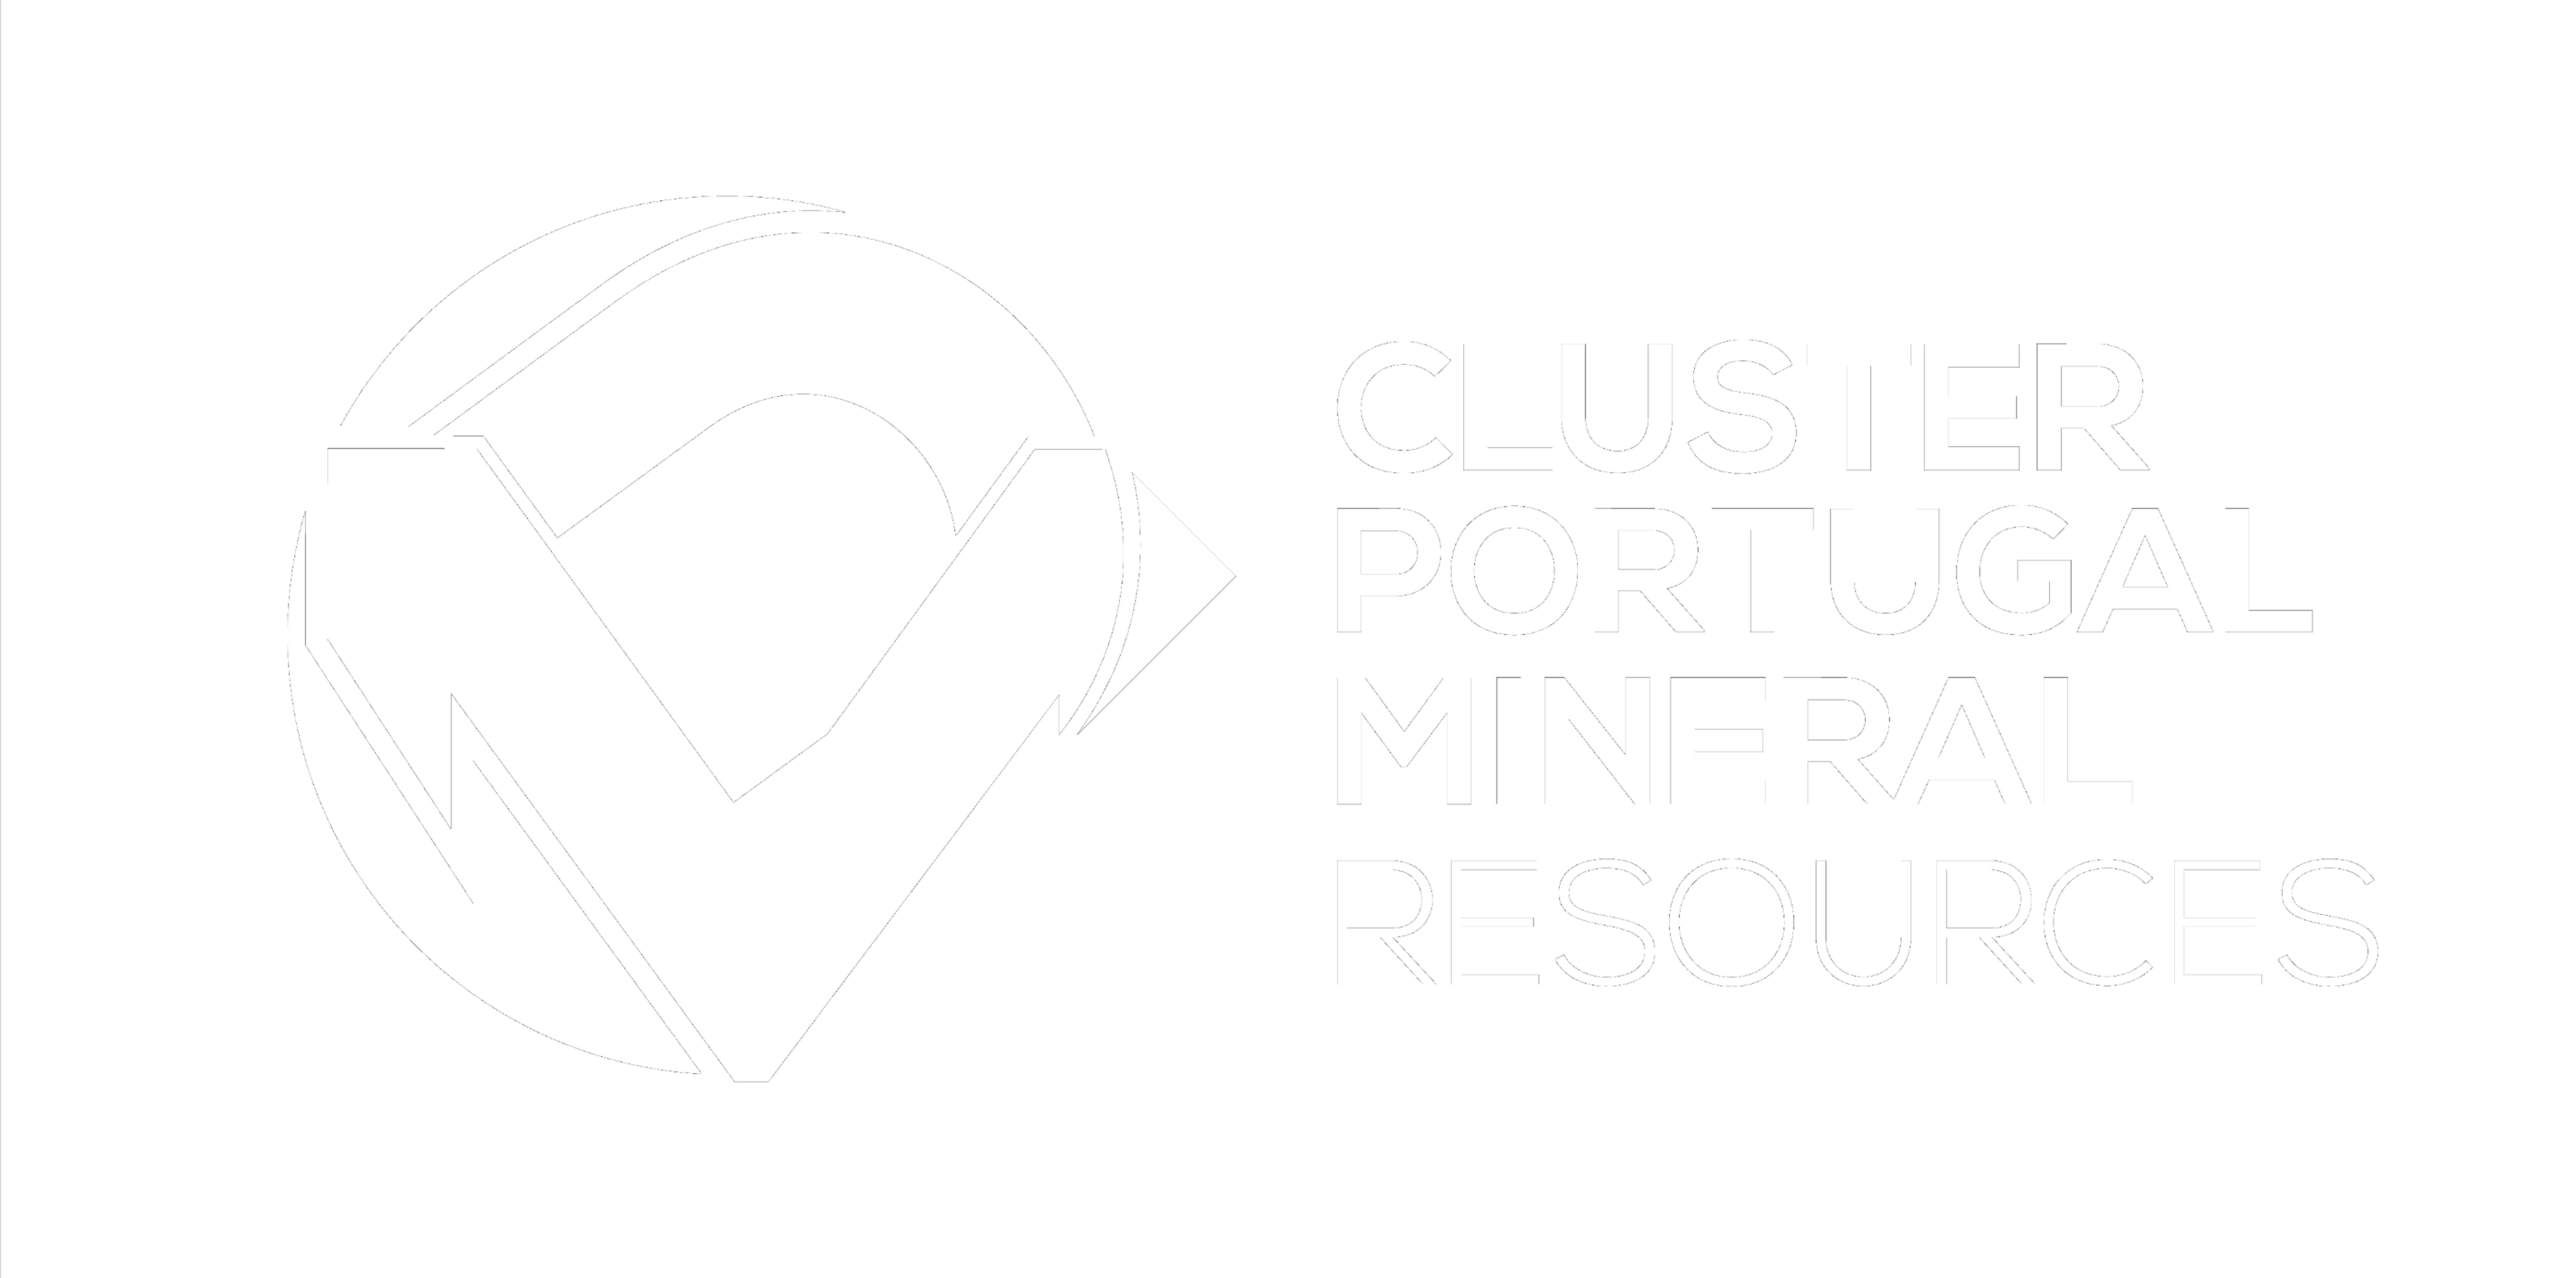 CLUSTER MINERAL RESOURCES